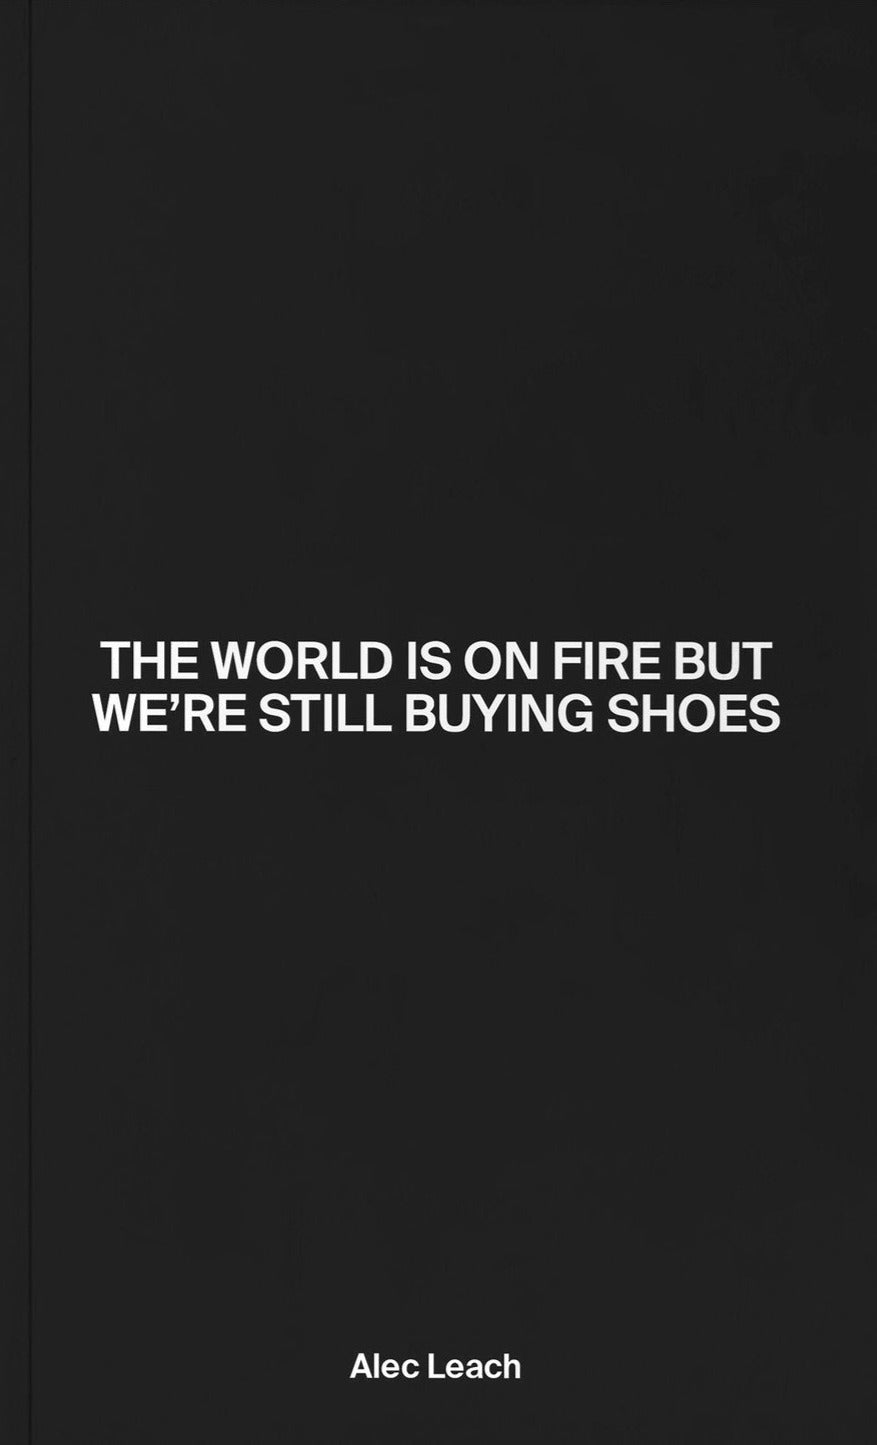 Alec Leach - The World Is On Fire But We’re Still Buying Shoes